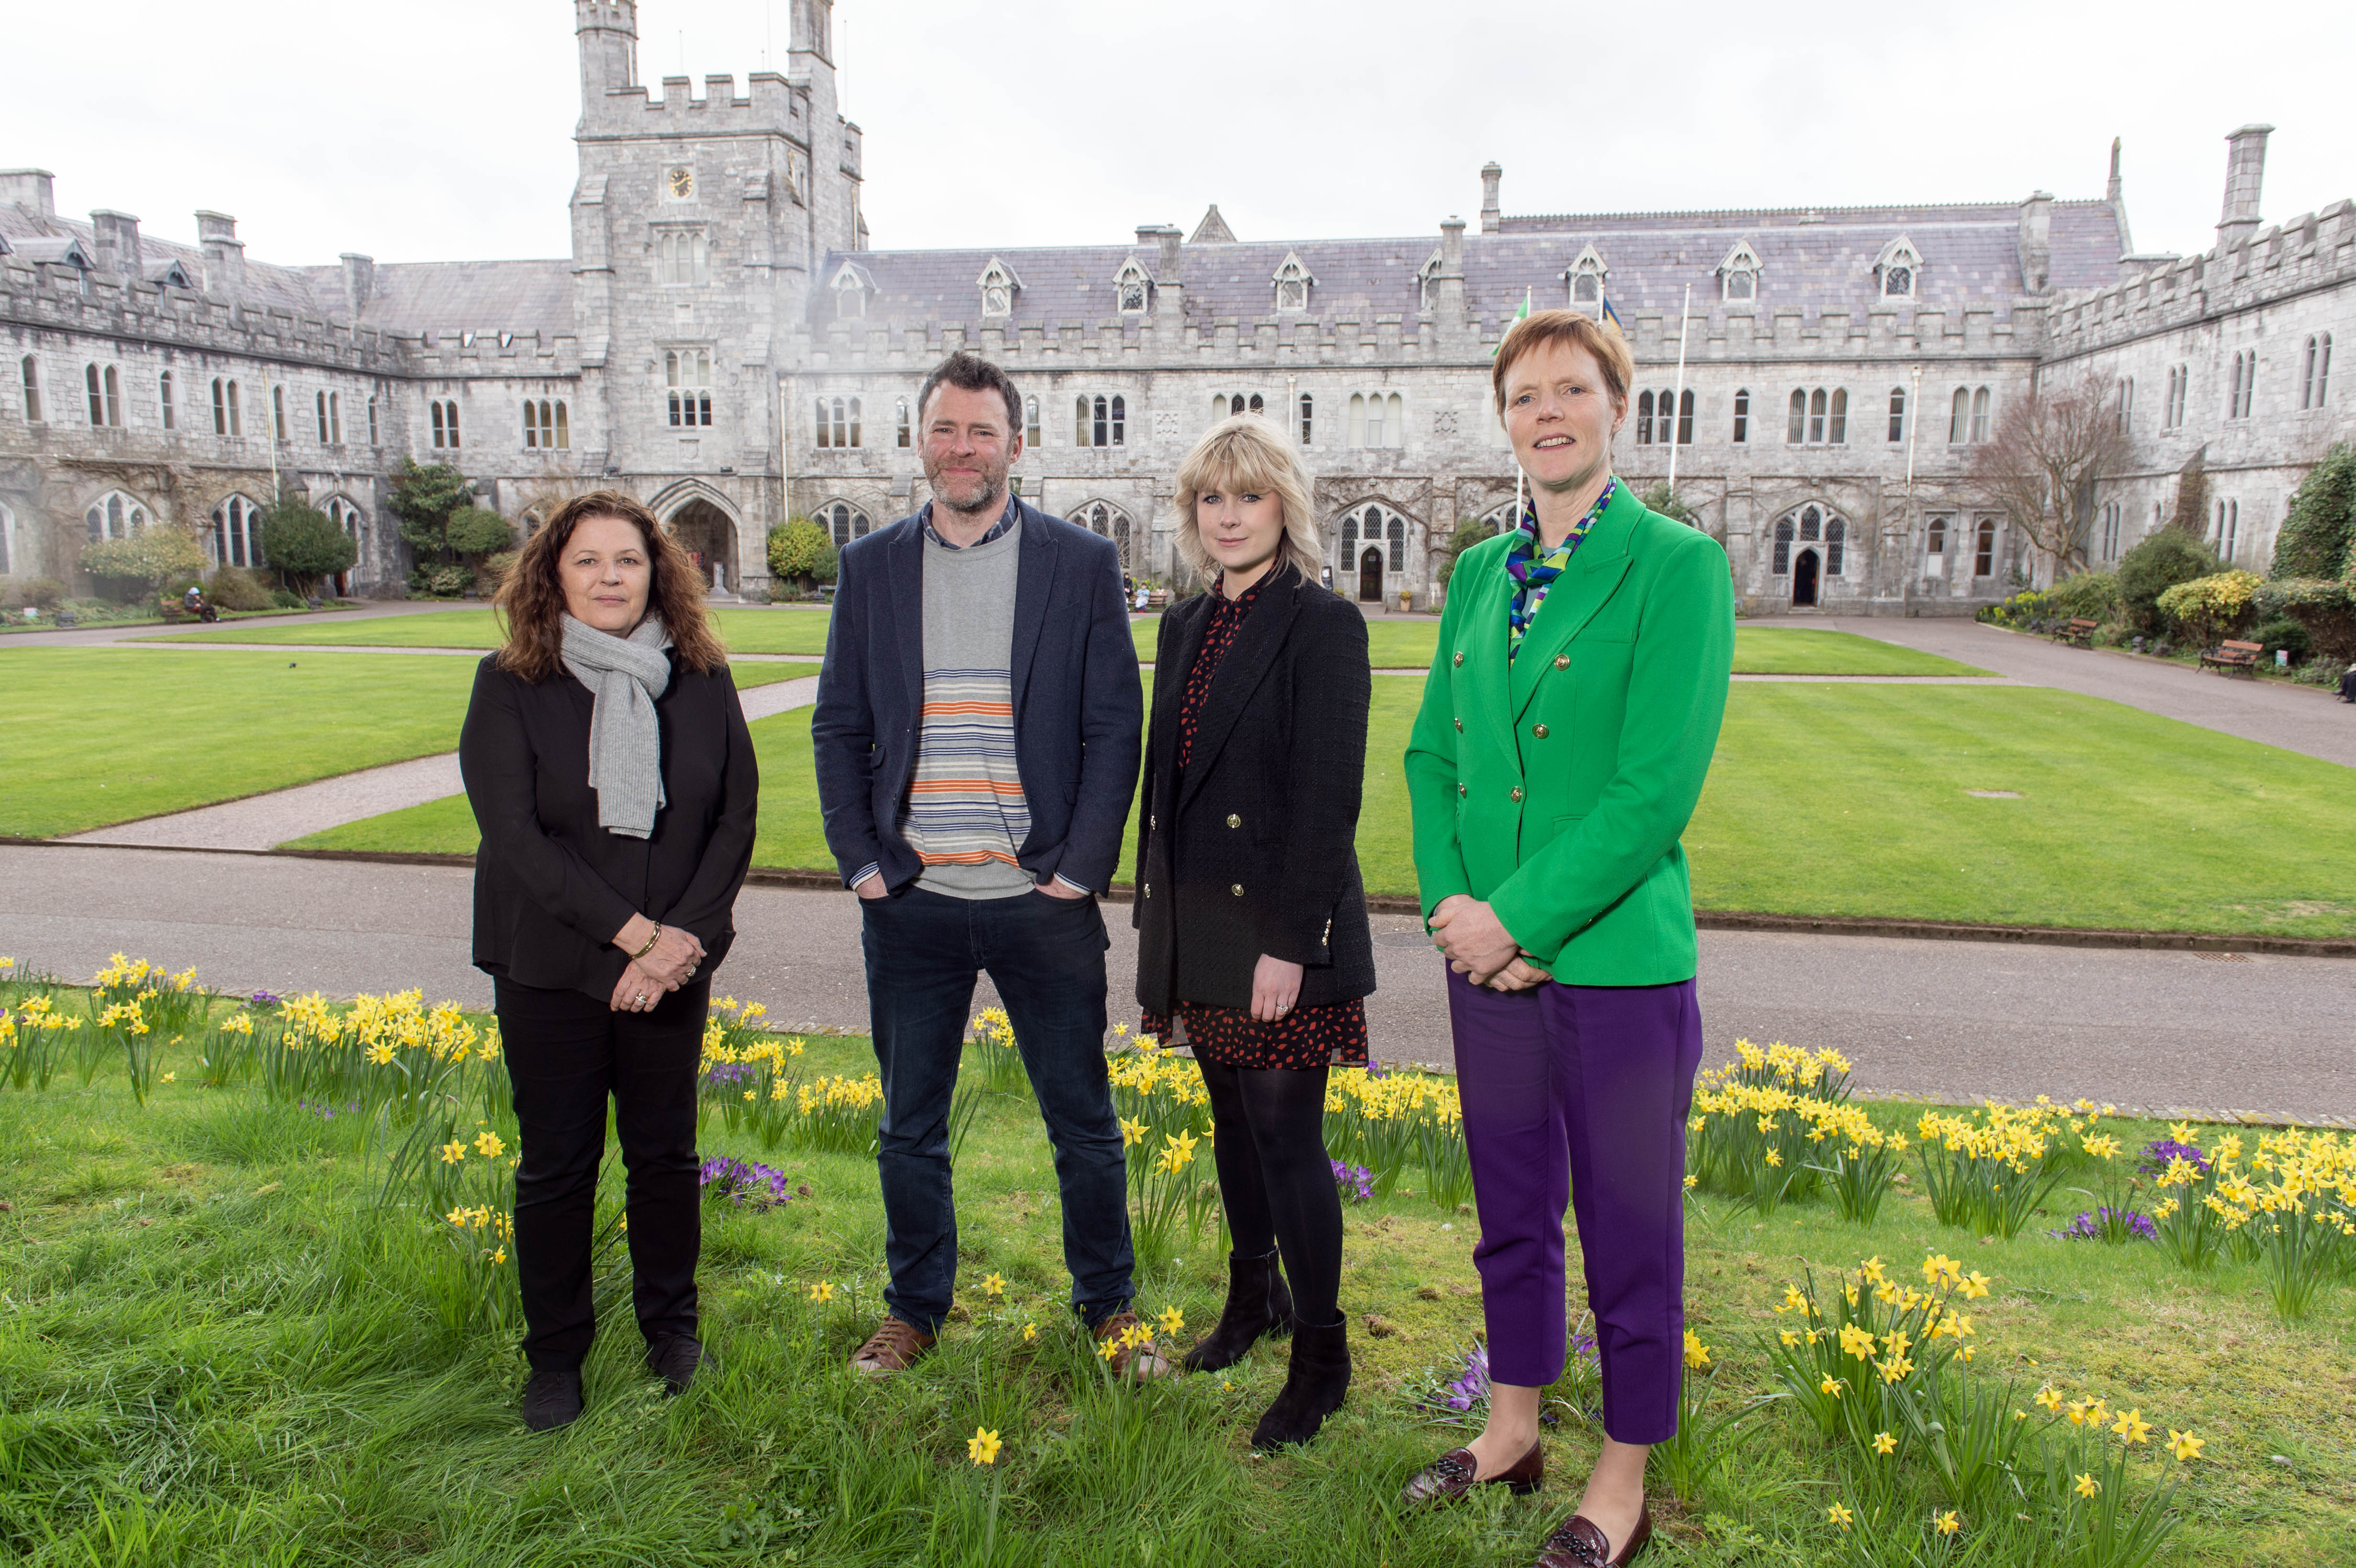 Dr Susan Joyce,  Lecturer and Funded Investigator at College of SEFS UCC; Dr Gerard McGlacken, Vice-Dean of Research and Innovation at College of SEFS UCC; Dr Karen McCarthy, UCC Innovation Commercialisation Case Manager; and Dr Sally Cudmore, Director of Innovation at UCC